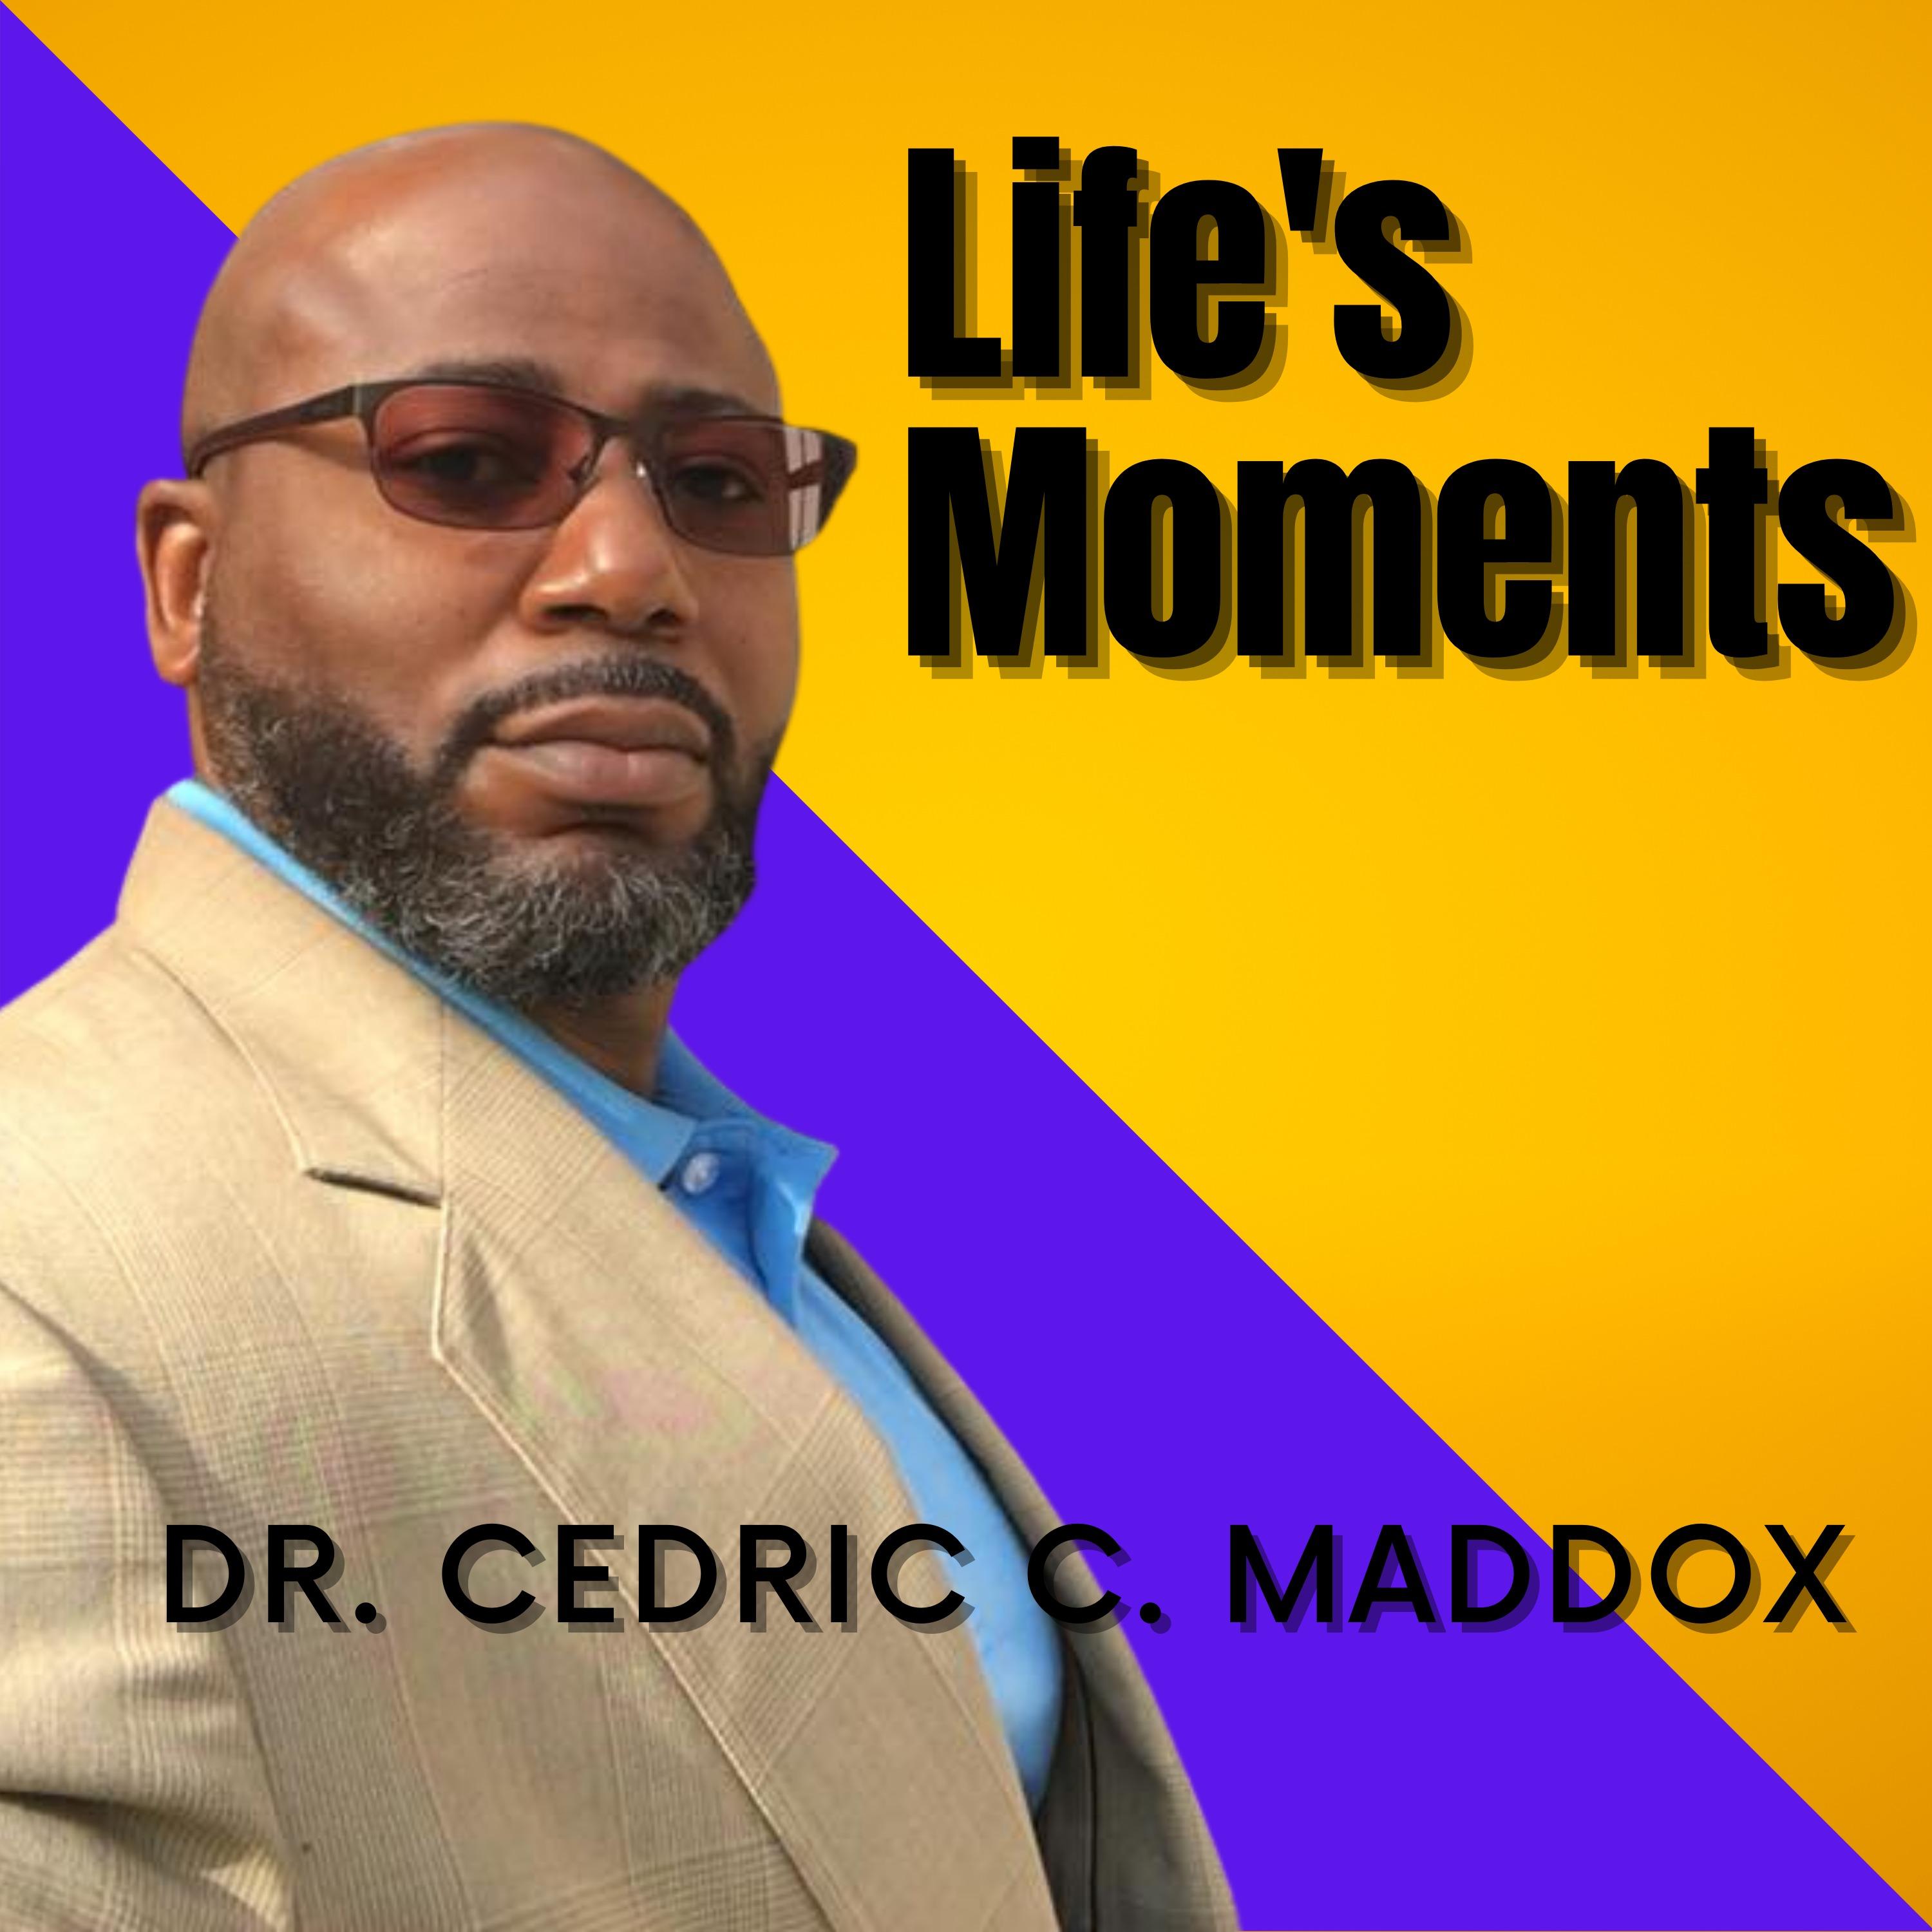 Life's Moments with Dr. Cedric C. Maddox